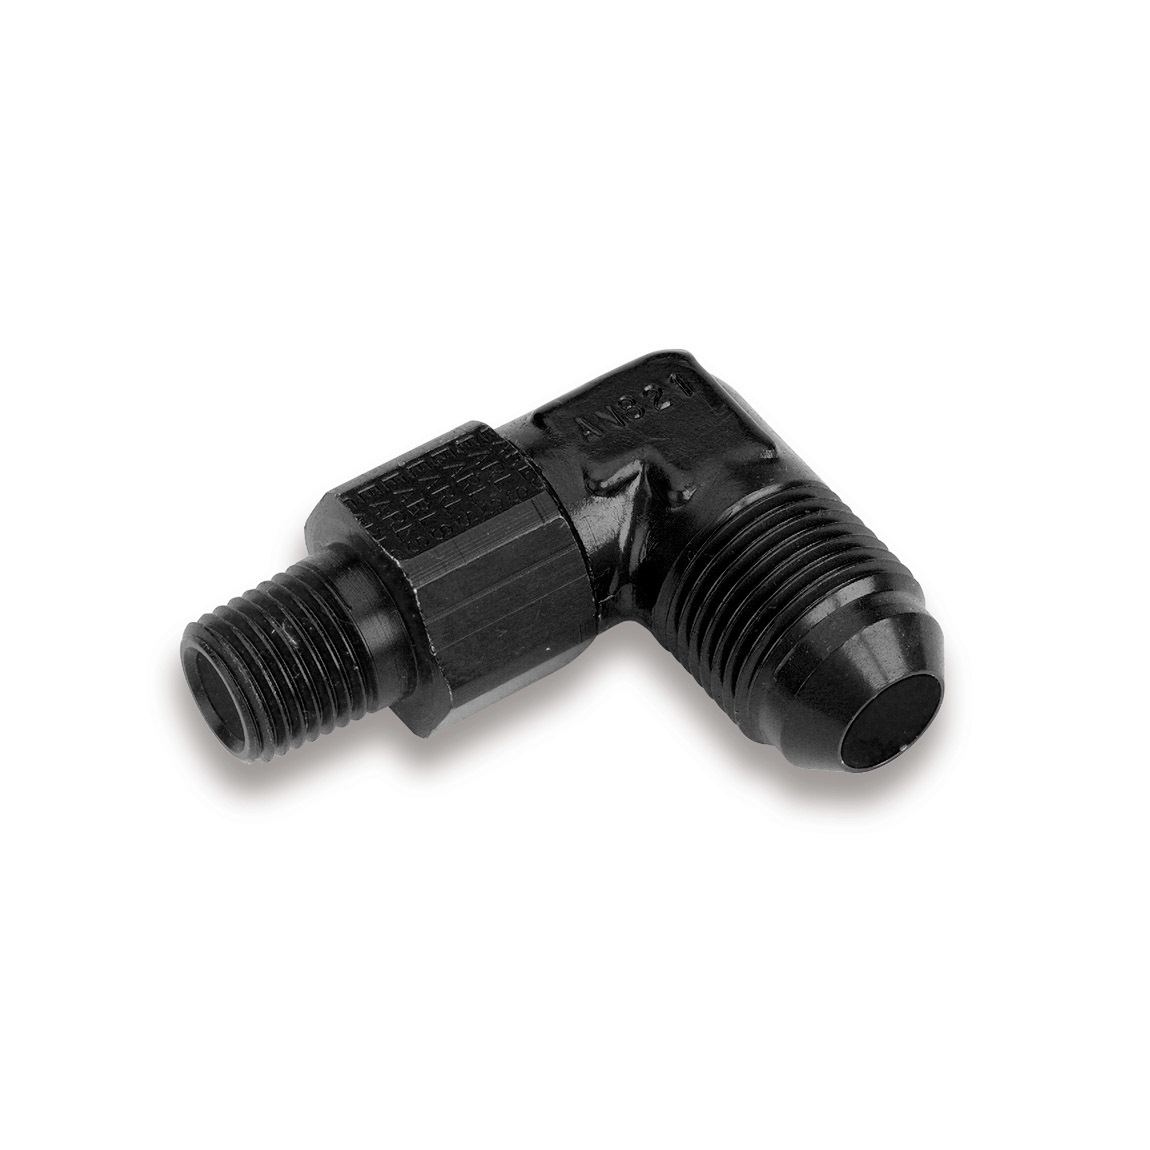 Earls AT922166ERL Fitting, Adapter, 90 Degree, 6 AN Male to 3/8 in NPT Male Swivel, Aluminum, Black Anodized, Each